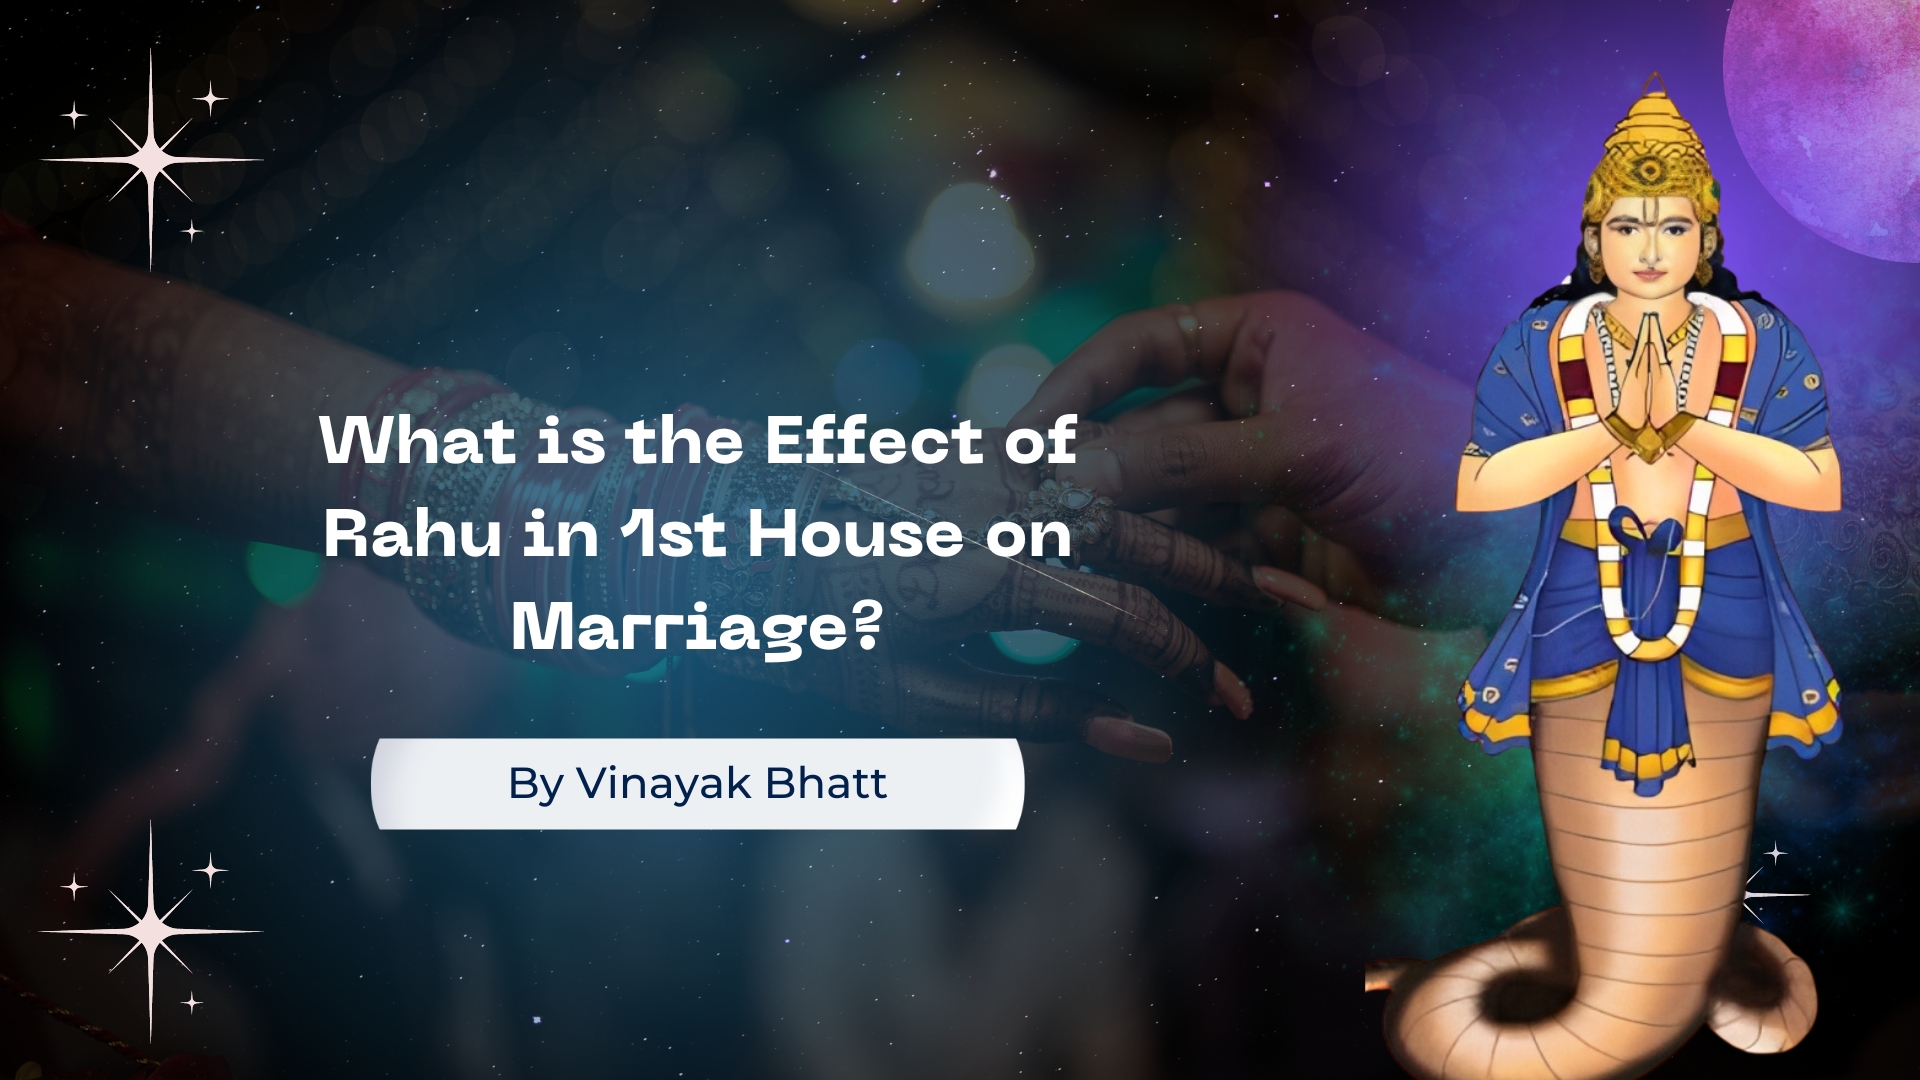 What is the effect of Rahu in 1st house on marriage